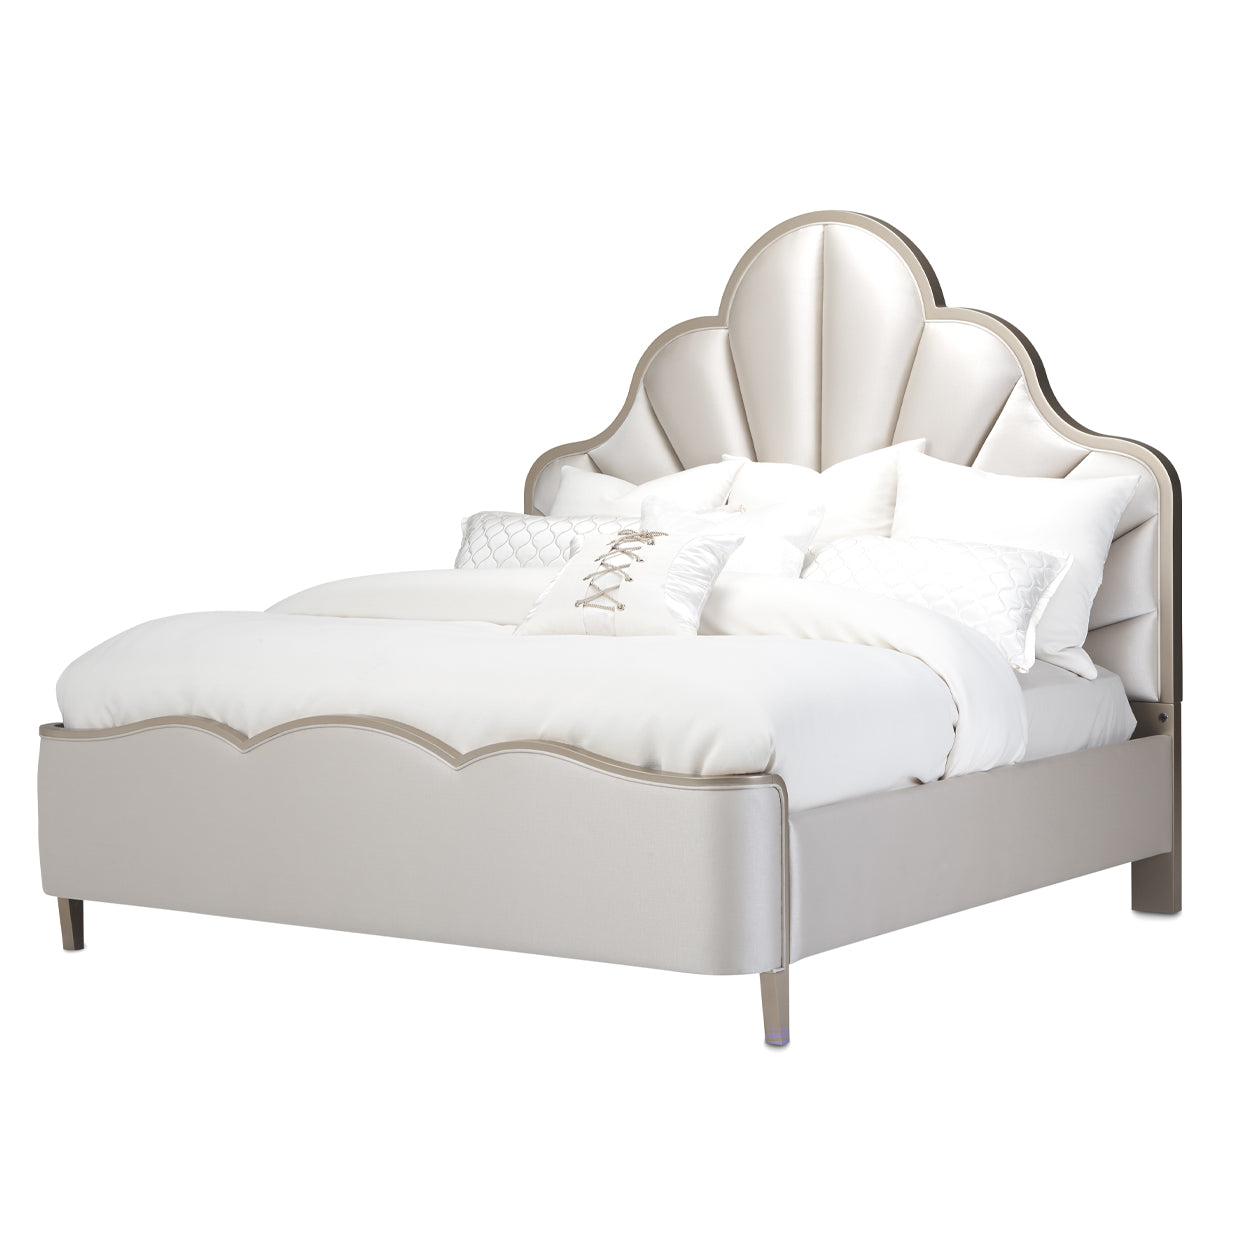 Cal King Scalloped Panel Bed, Malibu Crest Scalloped Panel Bed, Curved fan panel, headboard, USB chargers, Silky paneling, Scalloped channel fan design, Faux silk, upholstery, Porcelain color, Footboard scalloped trim, Chardonnay finish, dream art, Michael amini